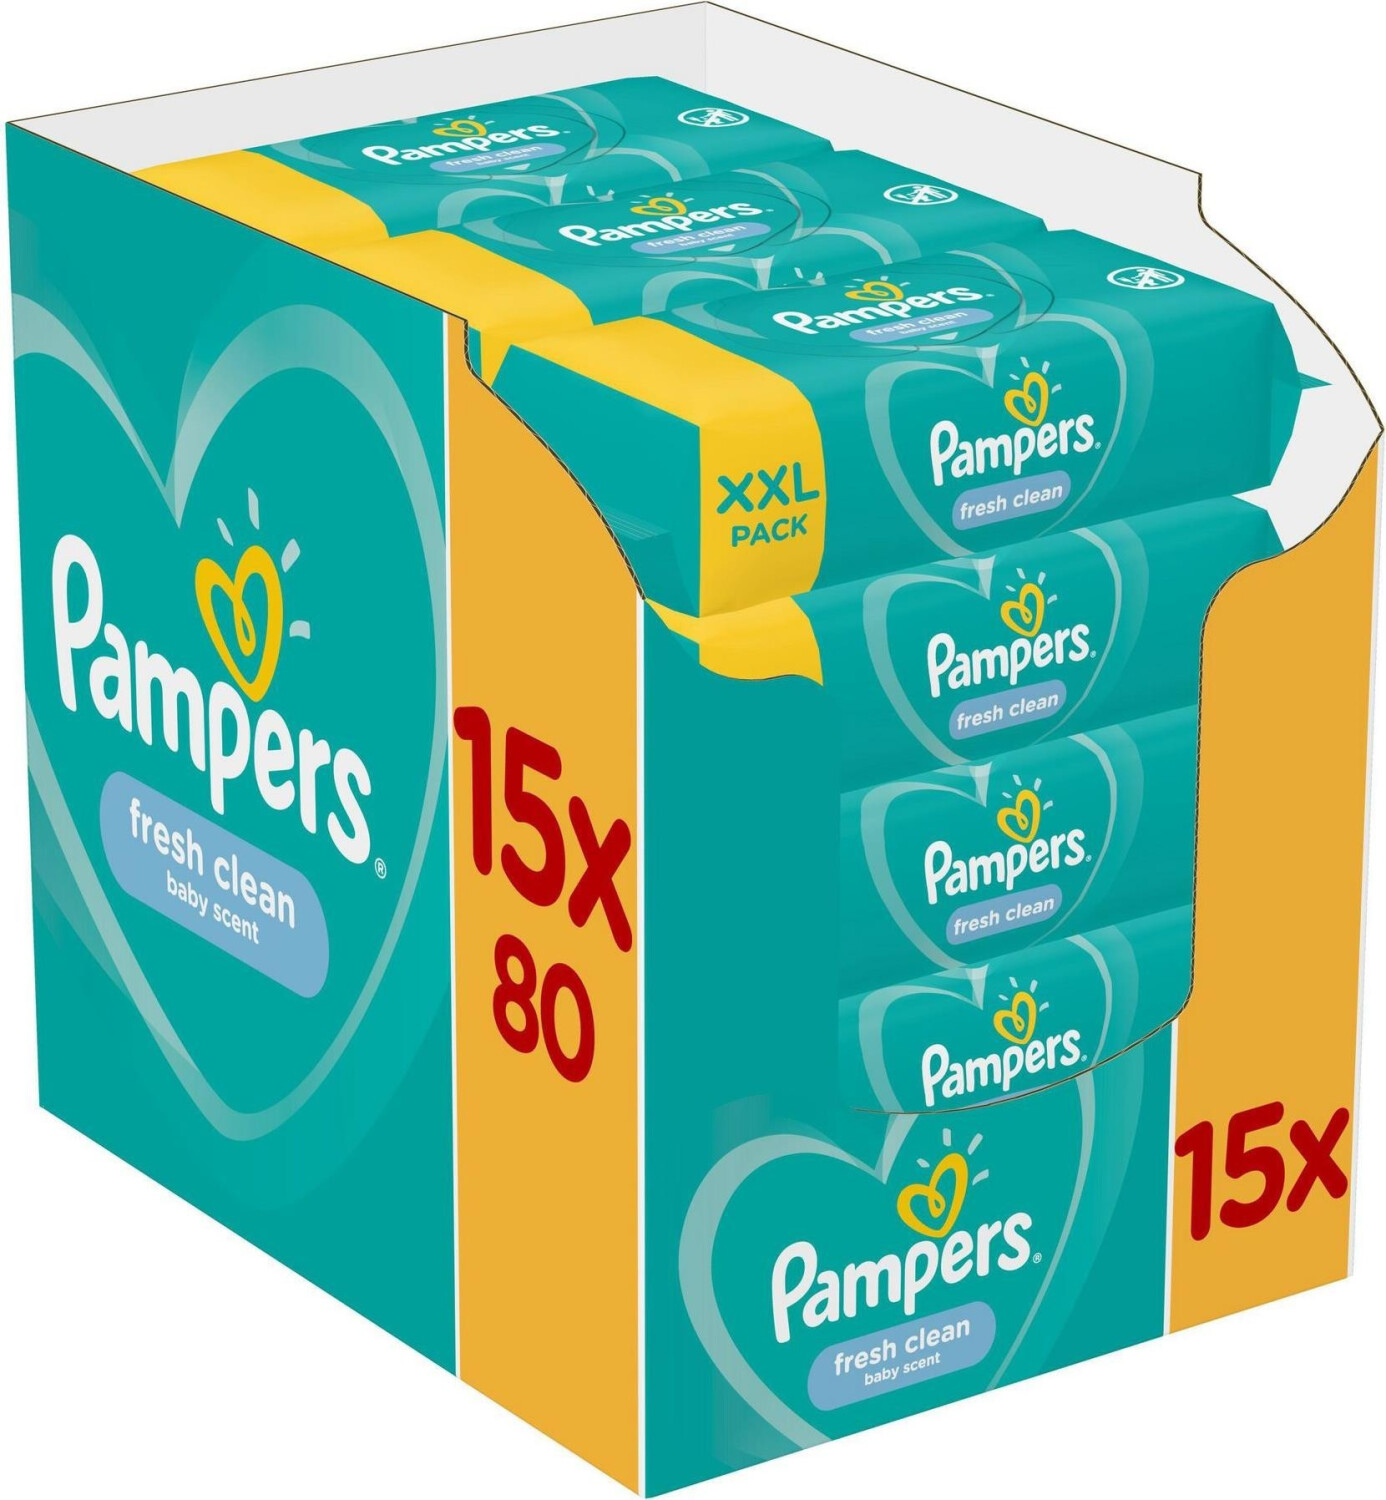 Photos - Baby Hygiene Pampers Fresh Clean wet Wipes 15 x 80 pcs 